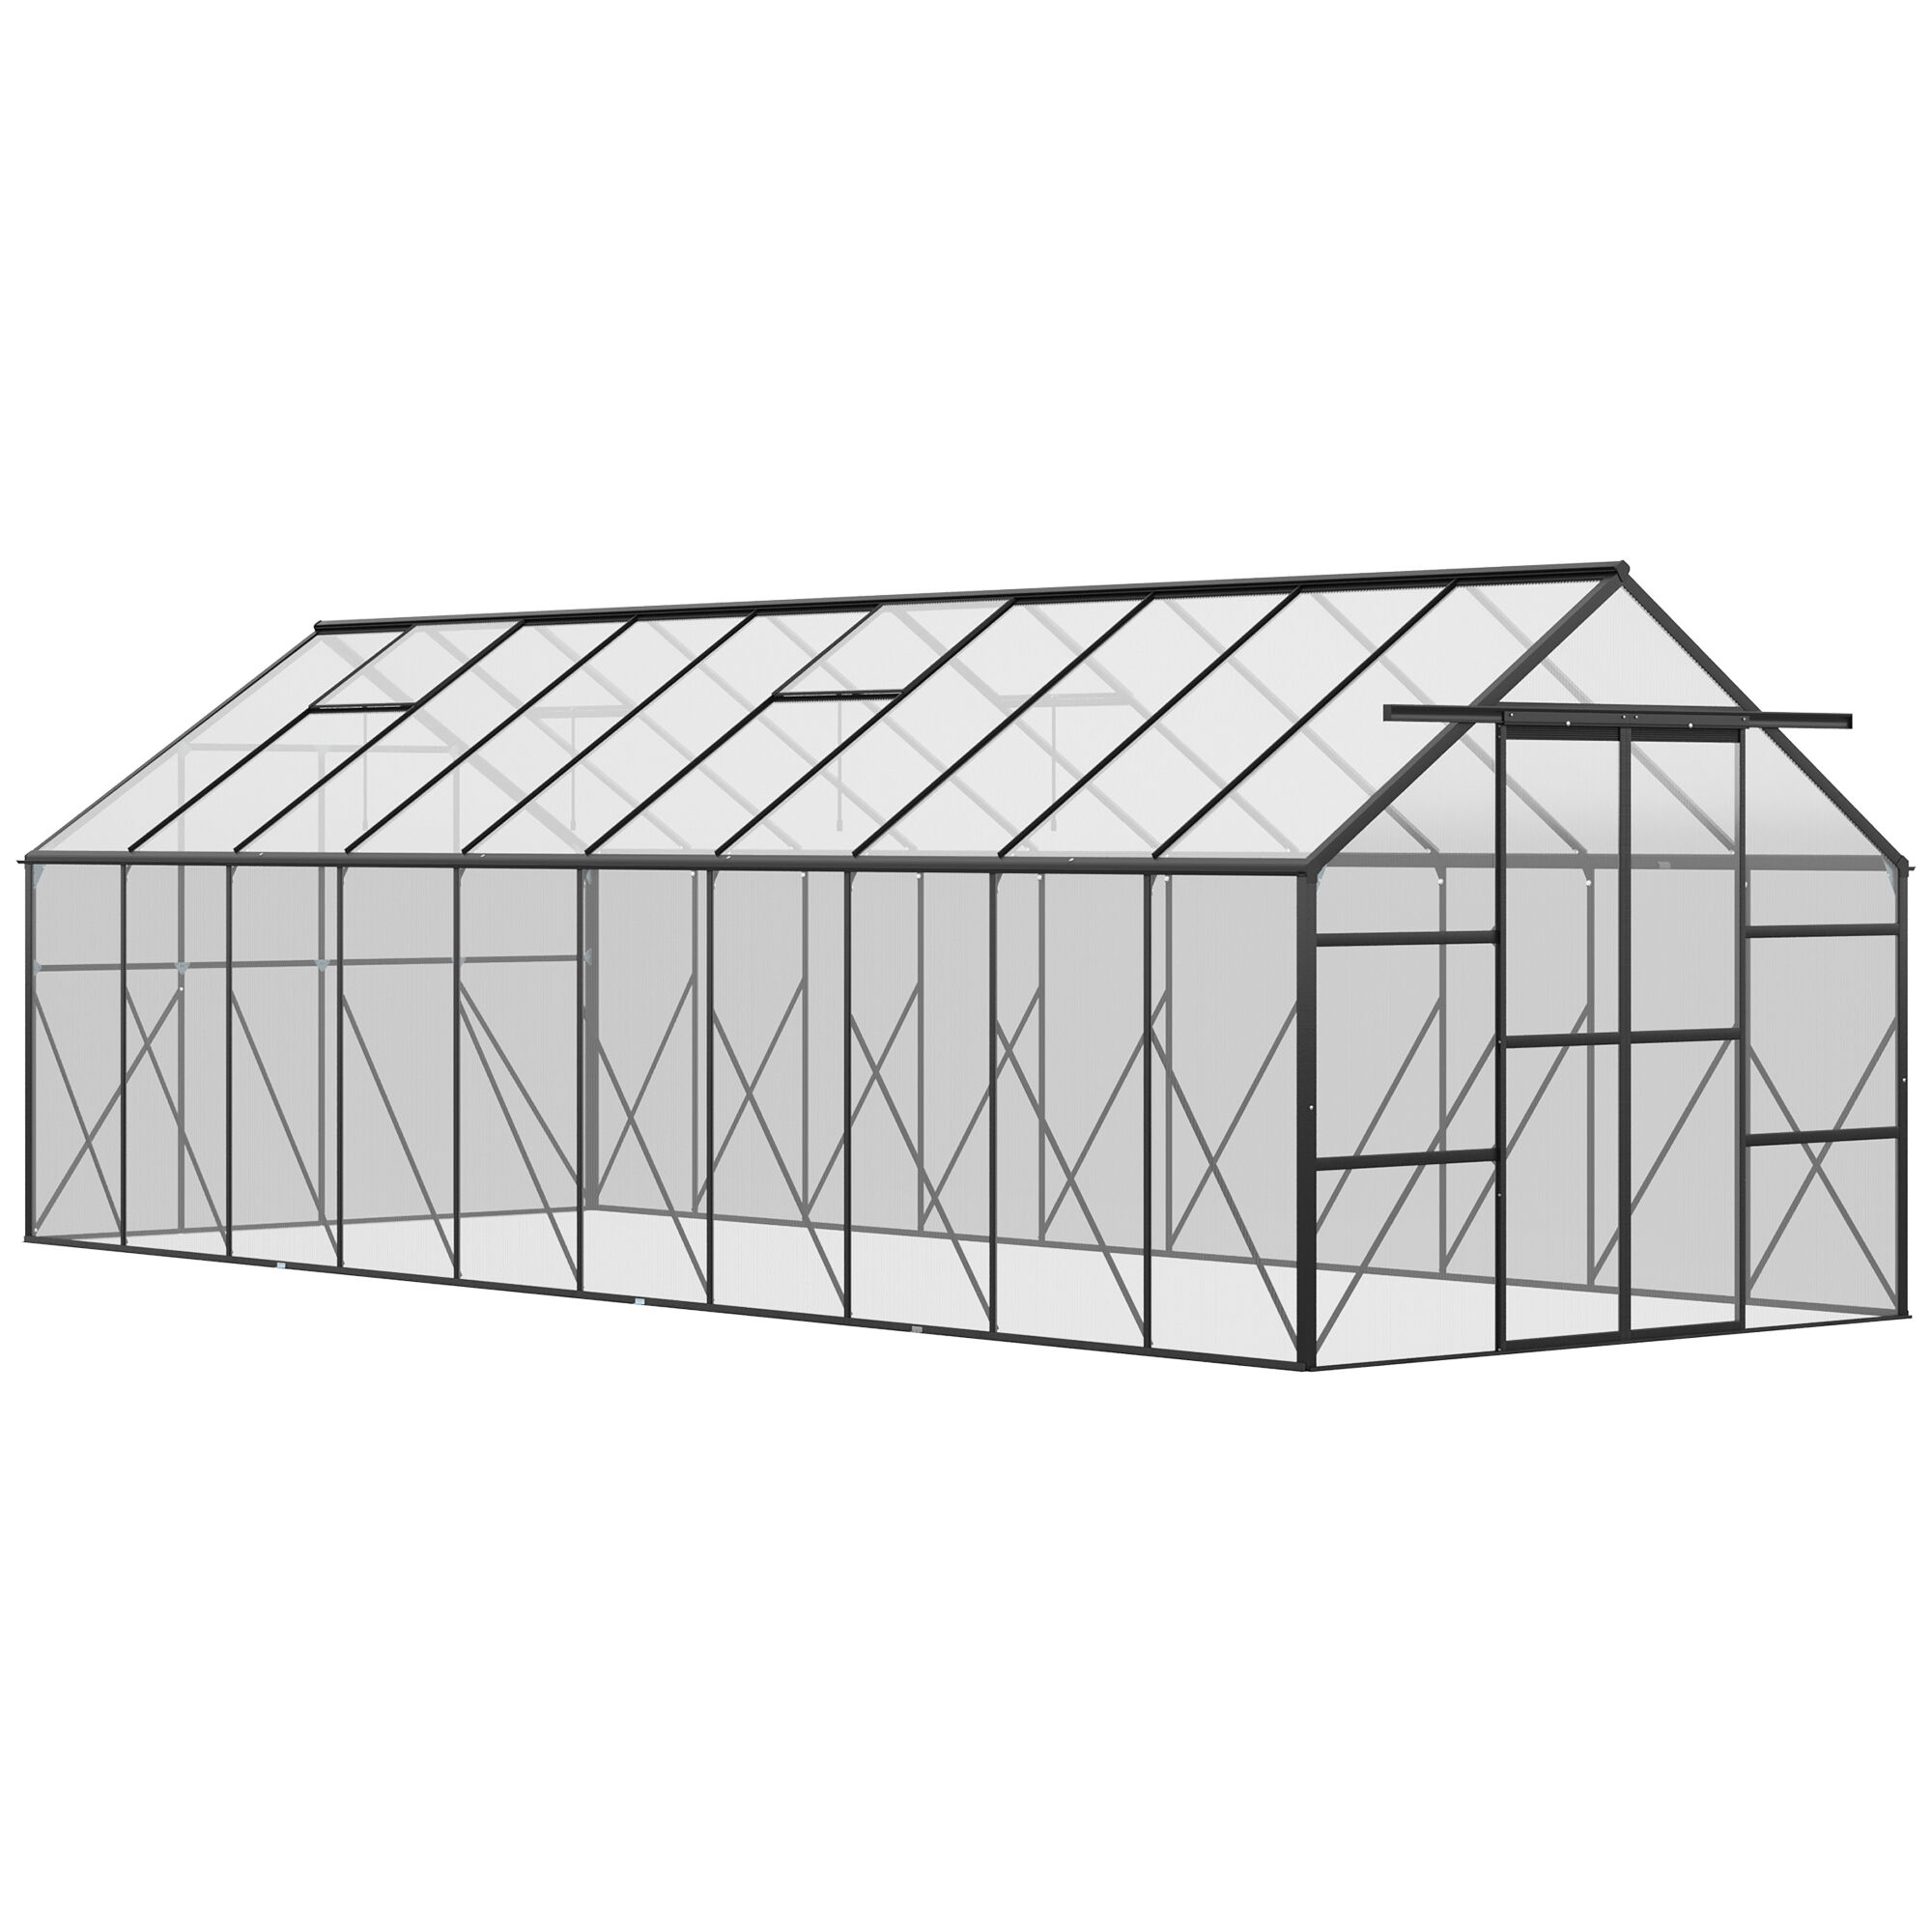 Outsunny 20' x 8' Aluminum Greenhouse Polycarbonate Walk-in Garden Greenhouse with Adjustable Roof Vent, Rain Gutter & Sliding Door for Winter, Clear